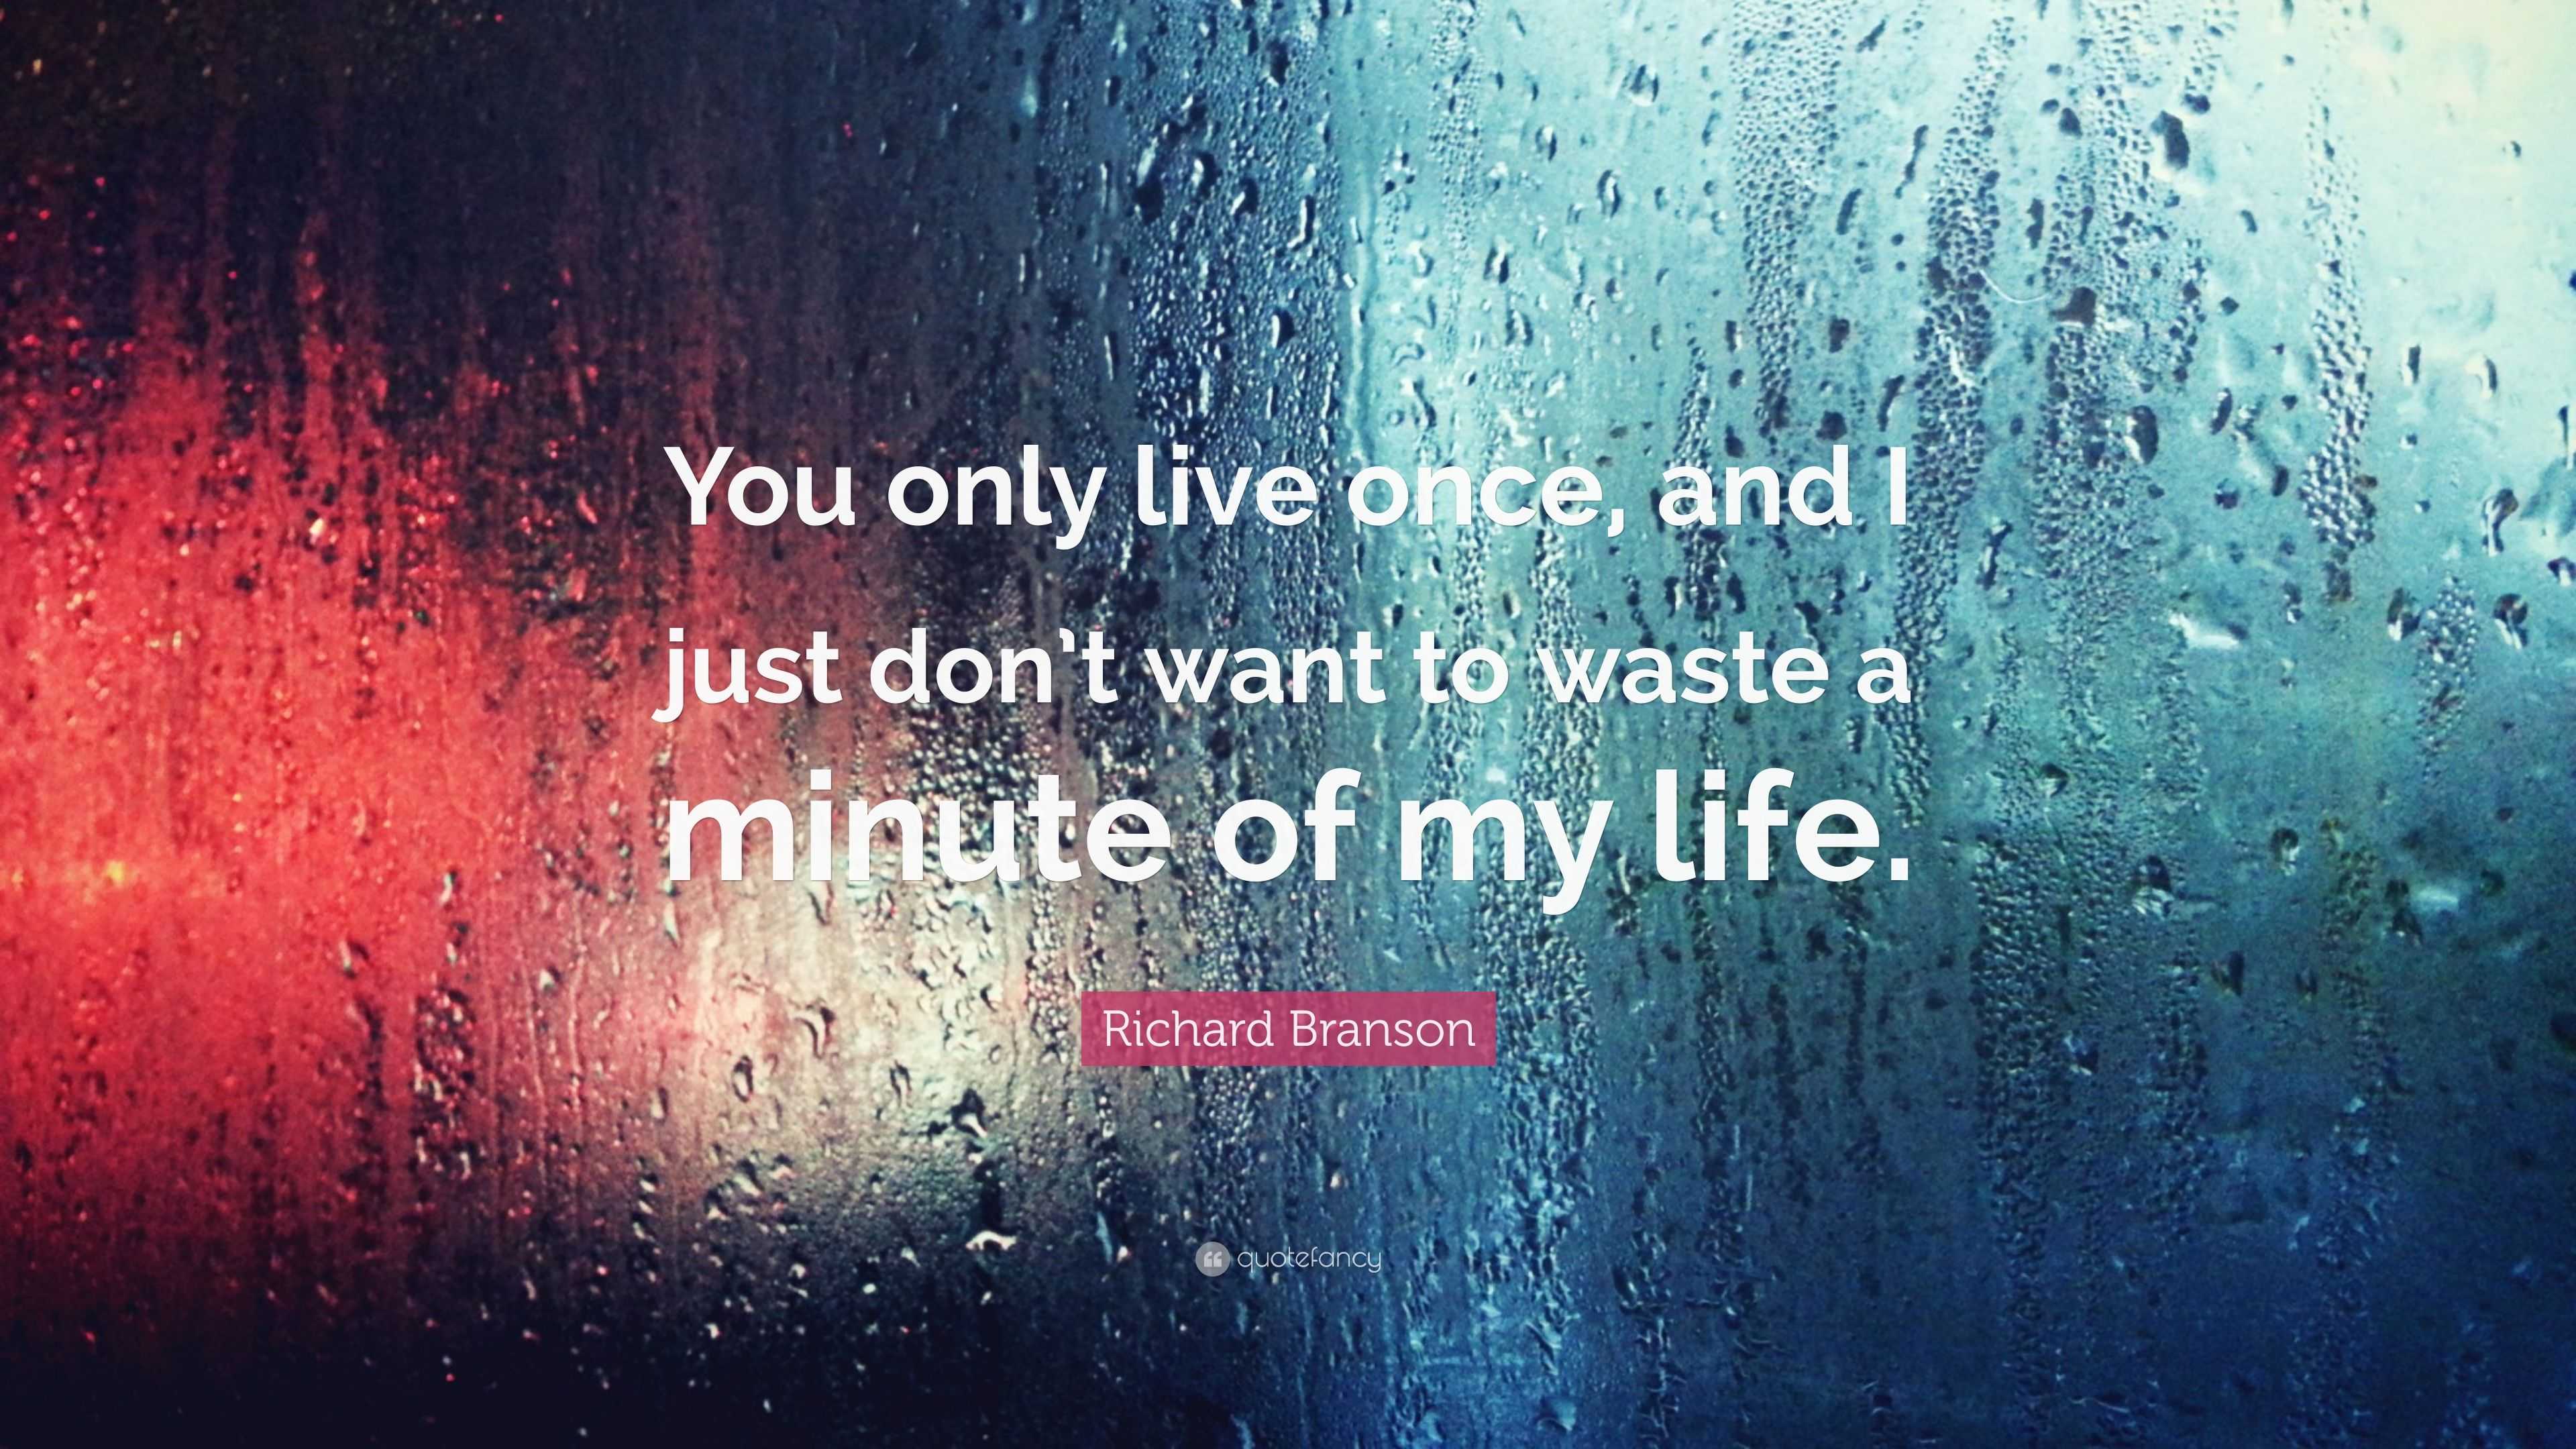 life only once quotes richard branson quote u201cyou only live once and i just don u0027t want